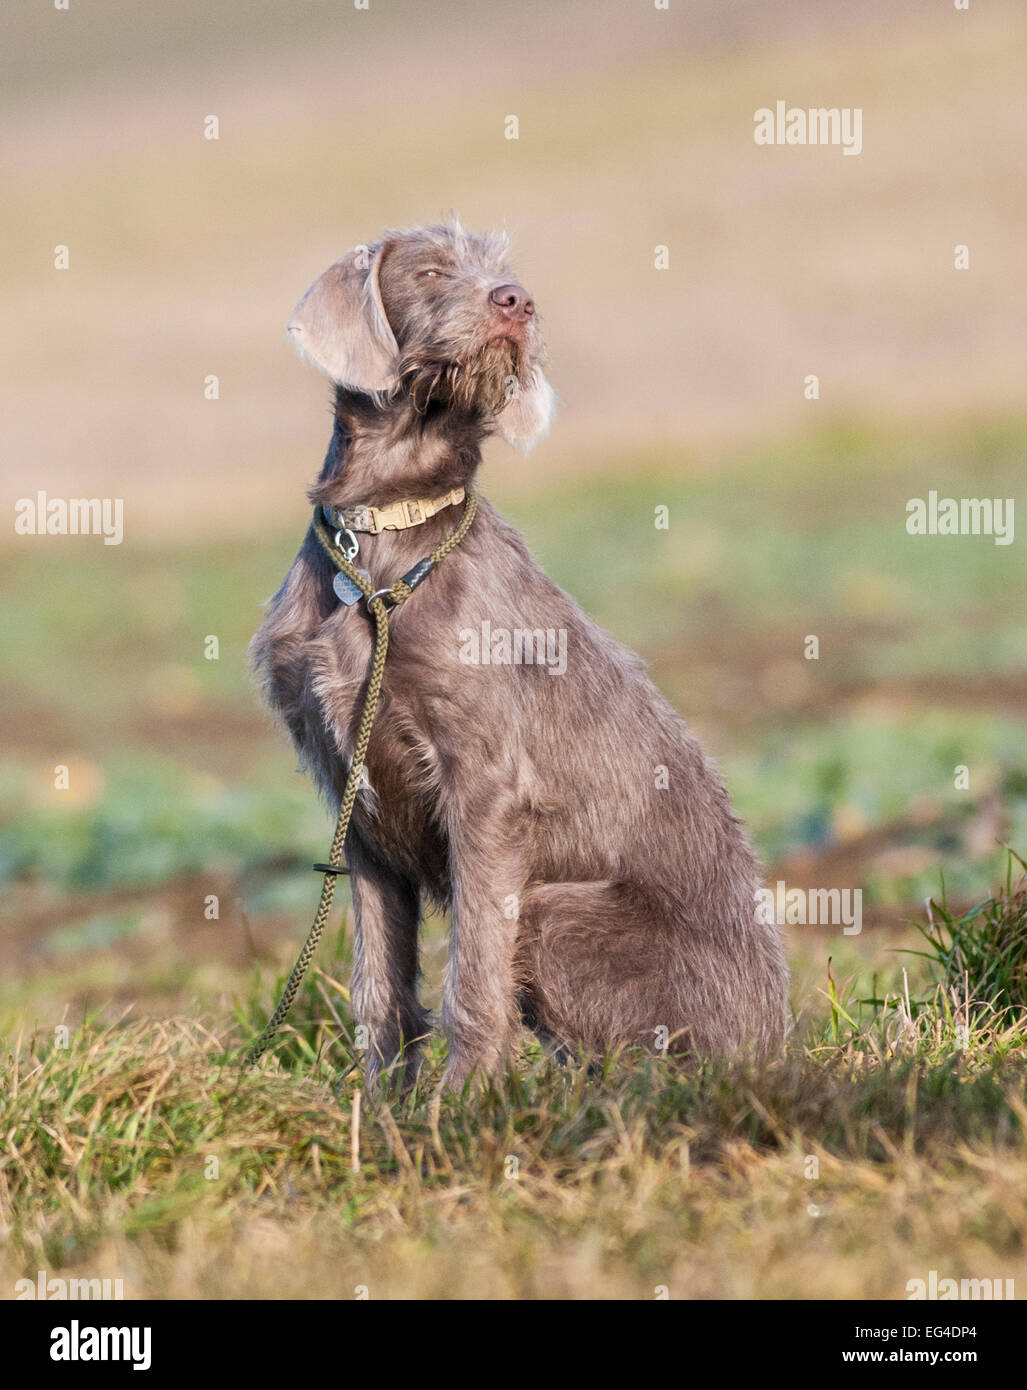 is a slovakian wirehaired pointer a good family dog